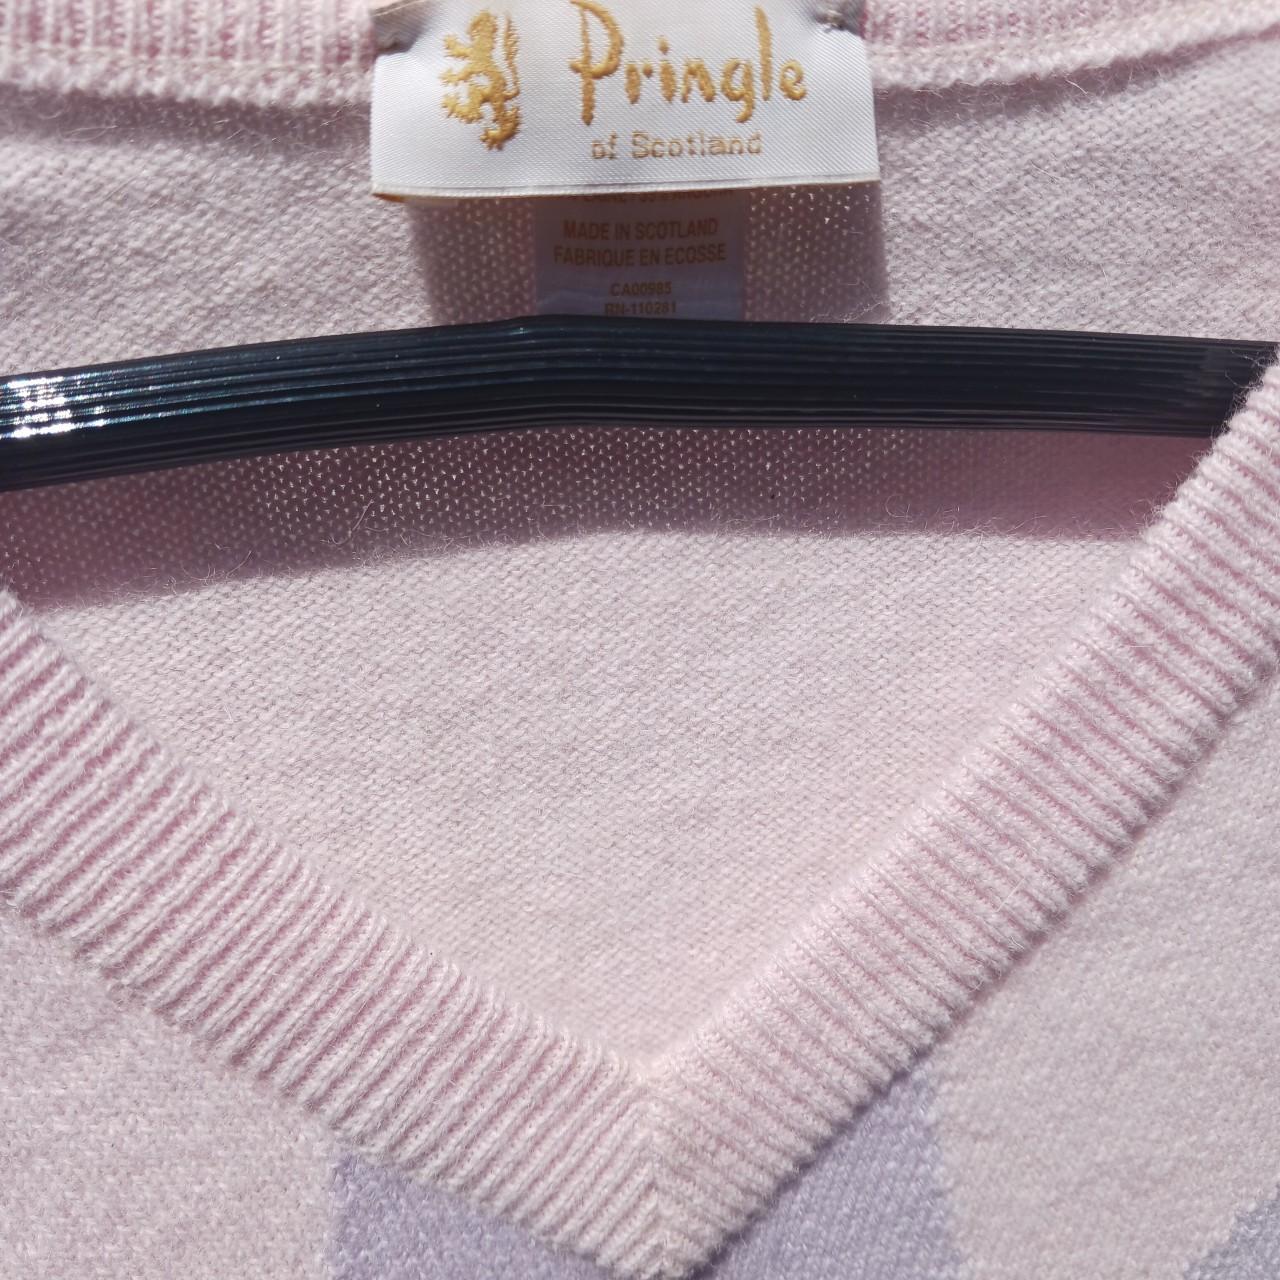 Product Image 3 - Vintage pringle made in Scotland